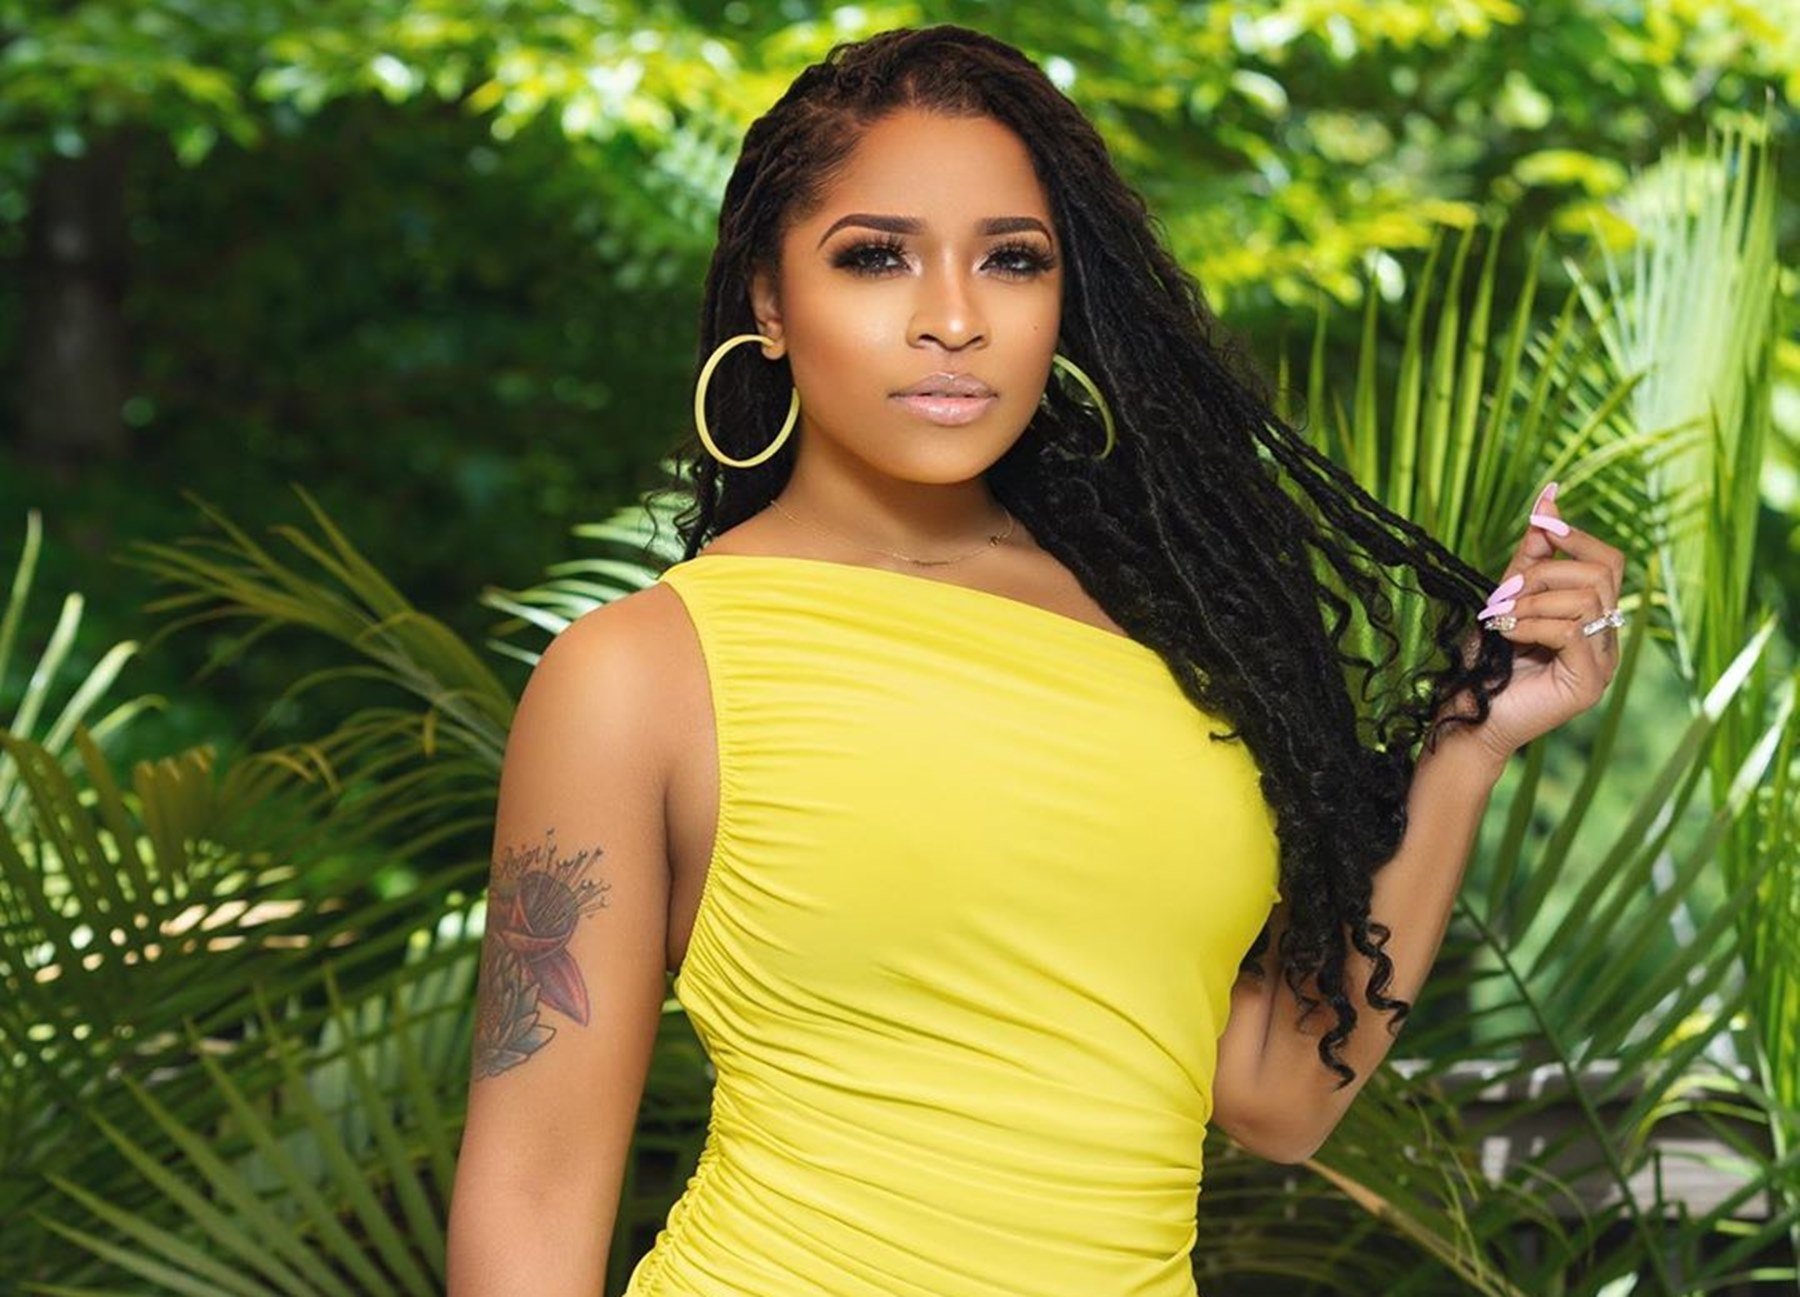 Toya Johnson Is Excited About The Virtual Weight No More Event